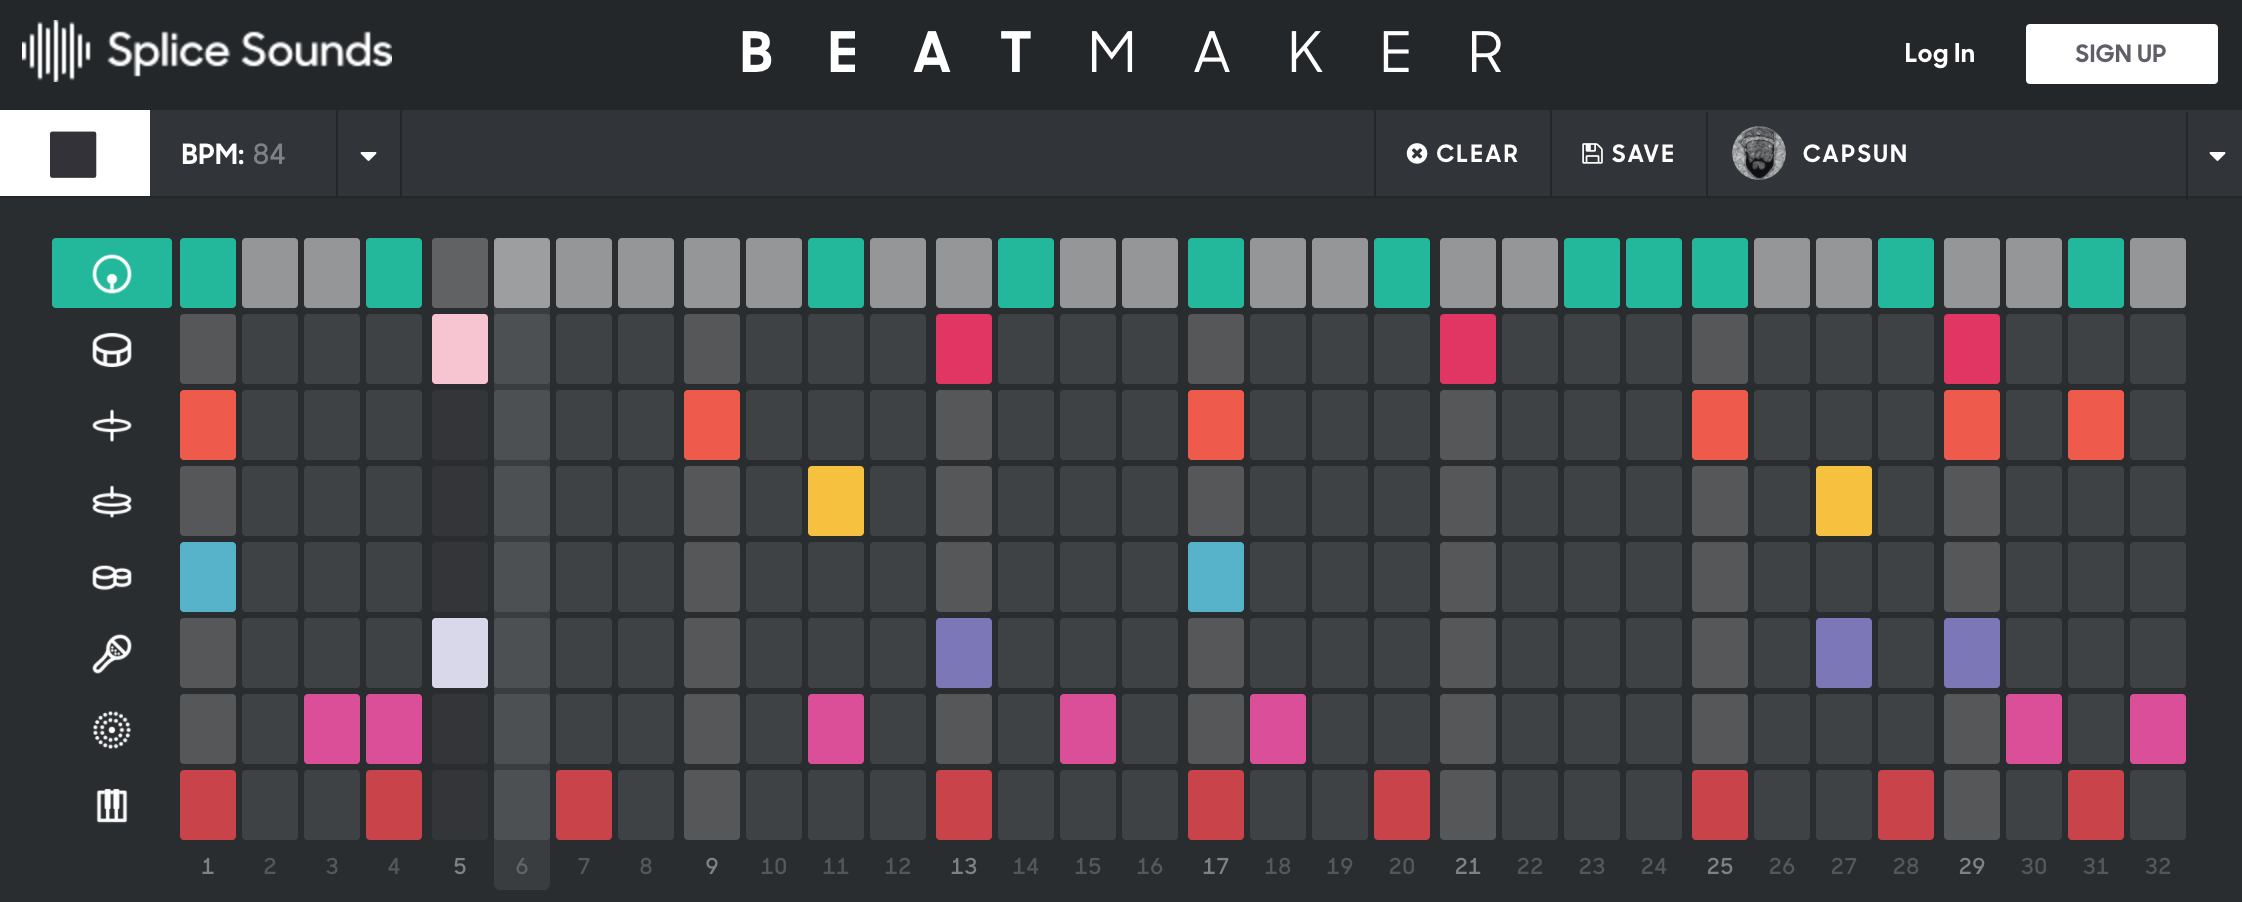 beat maker in browser